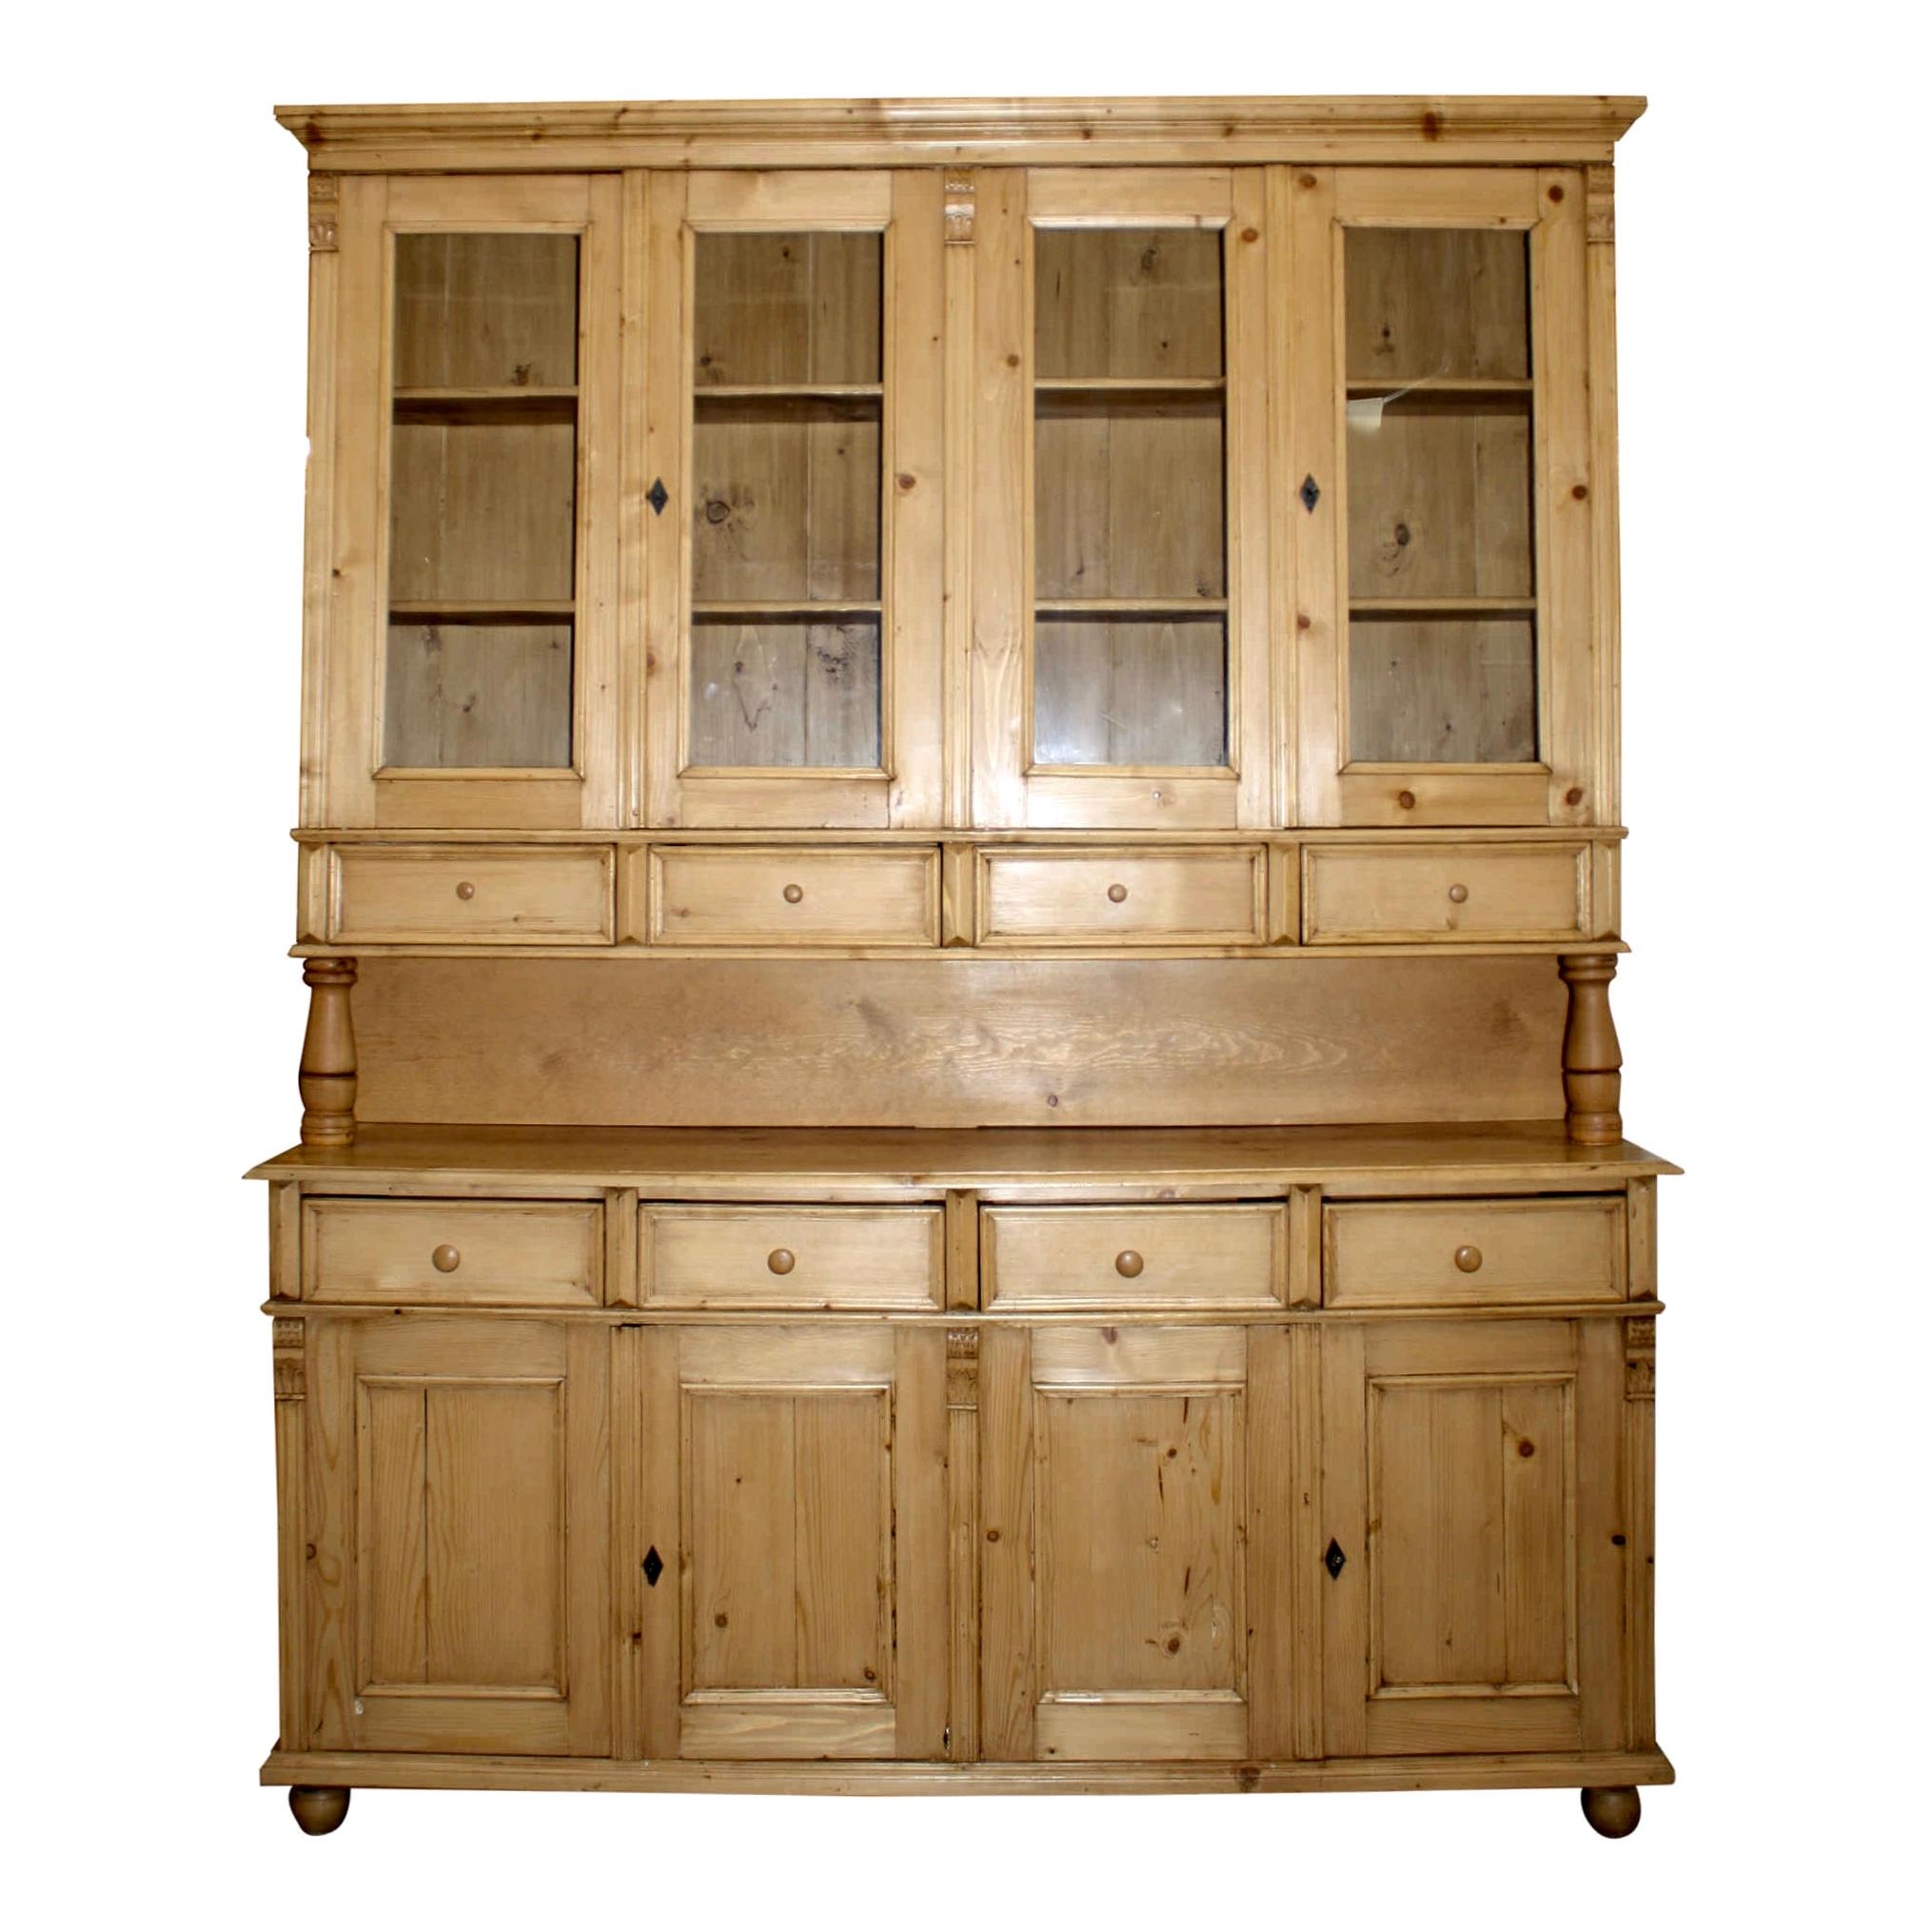 Generous in size and storage, this pine sideboard is comprised of a top with two sets of double glass doors above four drawers and a base with two sets of double recessed panel doors below four additional drawers. The drawers have dovetail corners